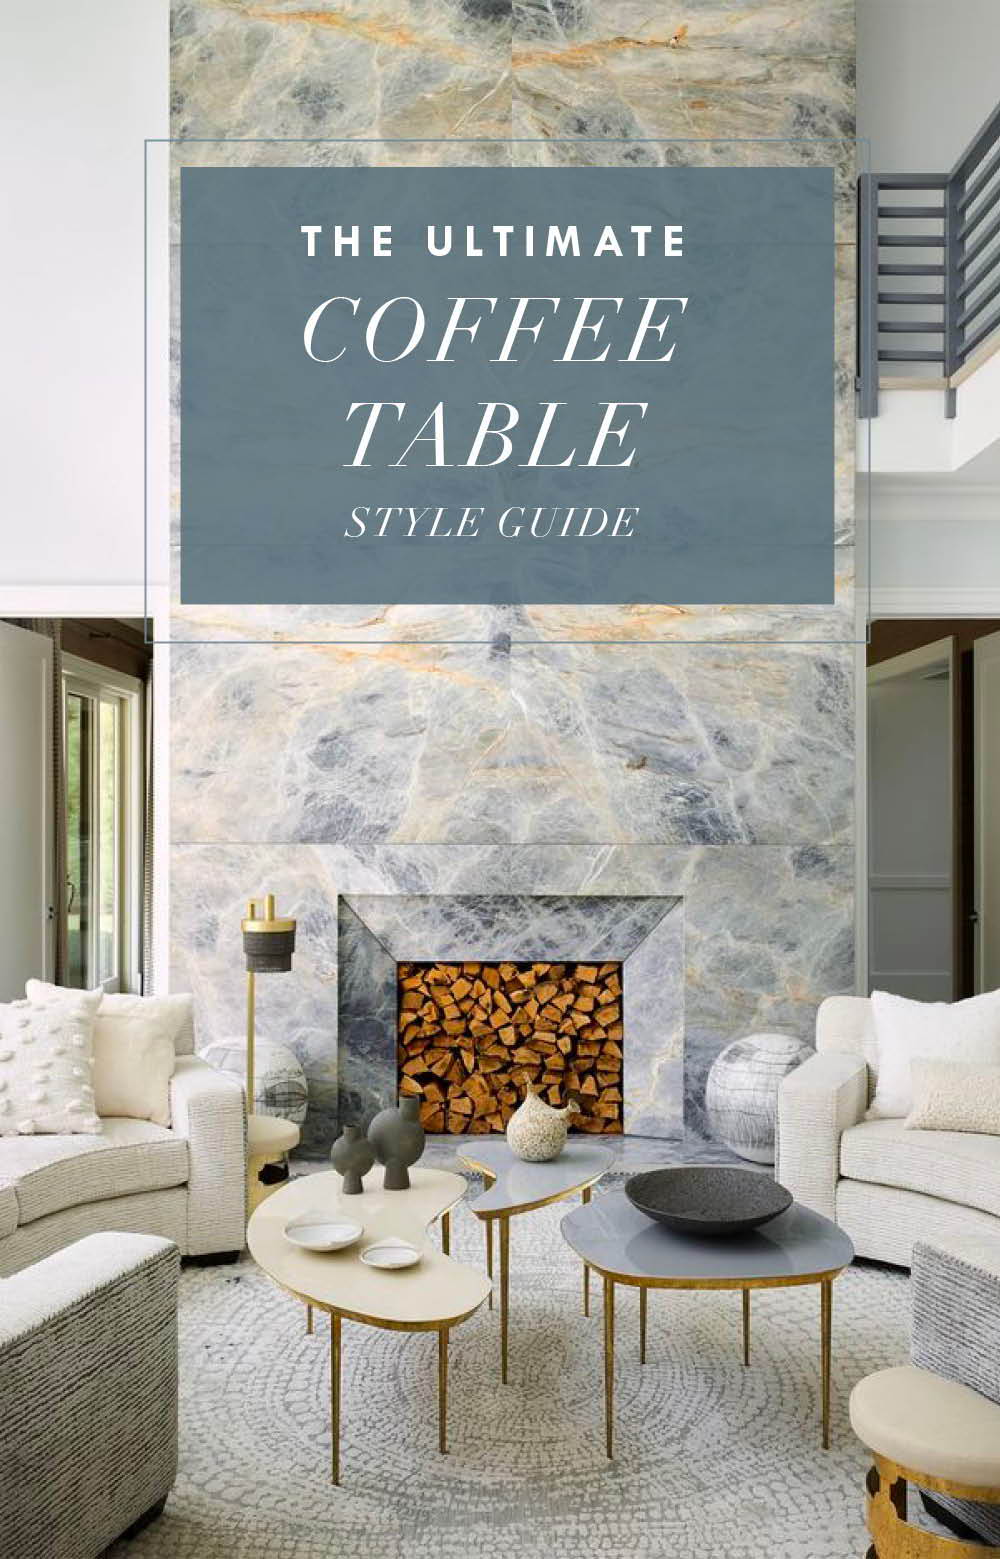 The Ultimate Coffee Table Style Guide